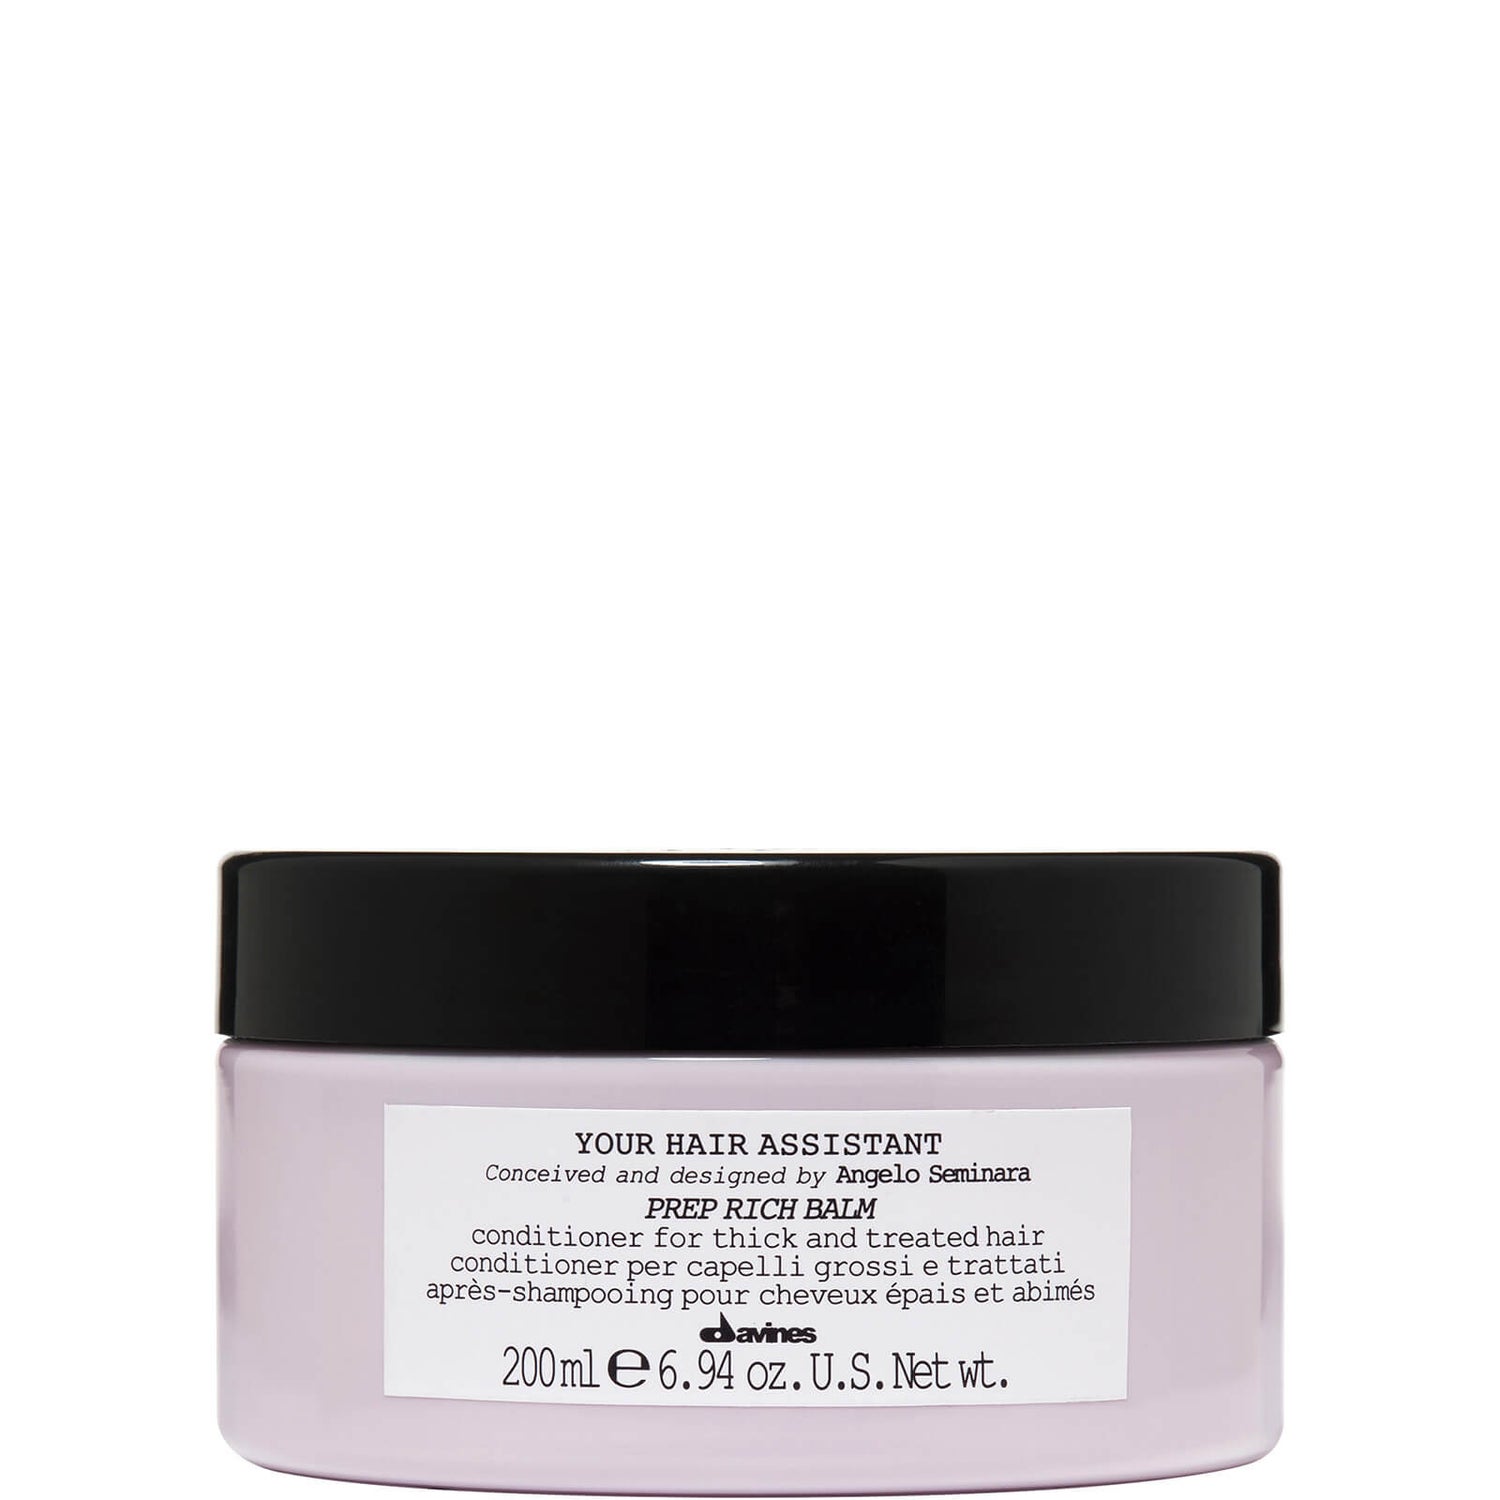 Davines Your Hair Assistant Prep Rich Balm Conditioner 200ml